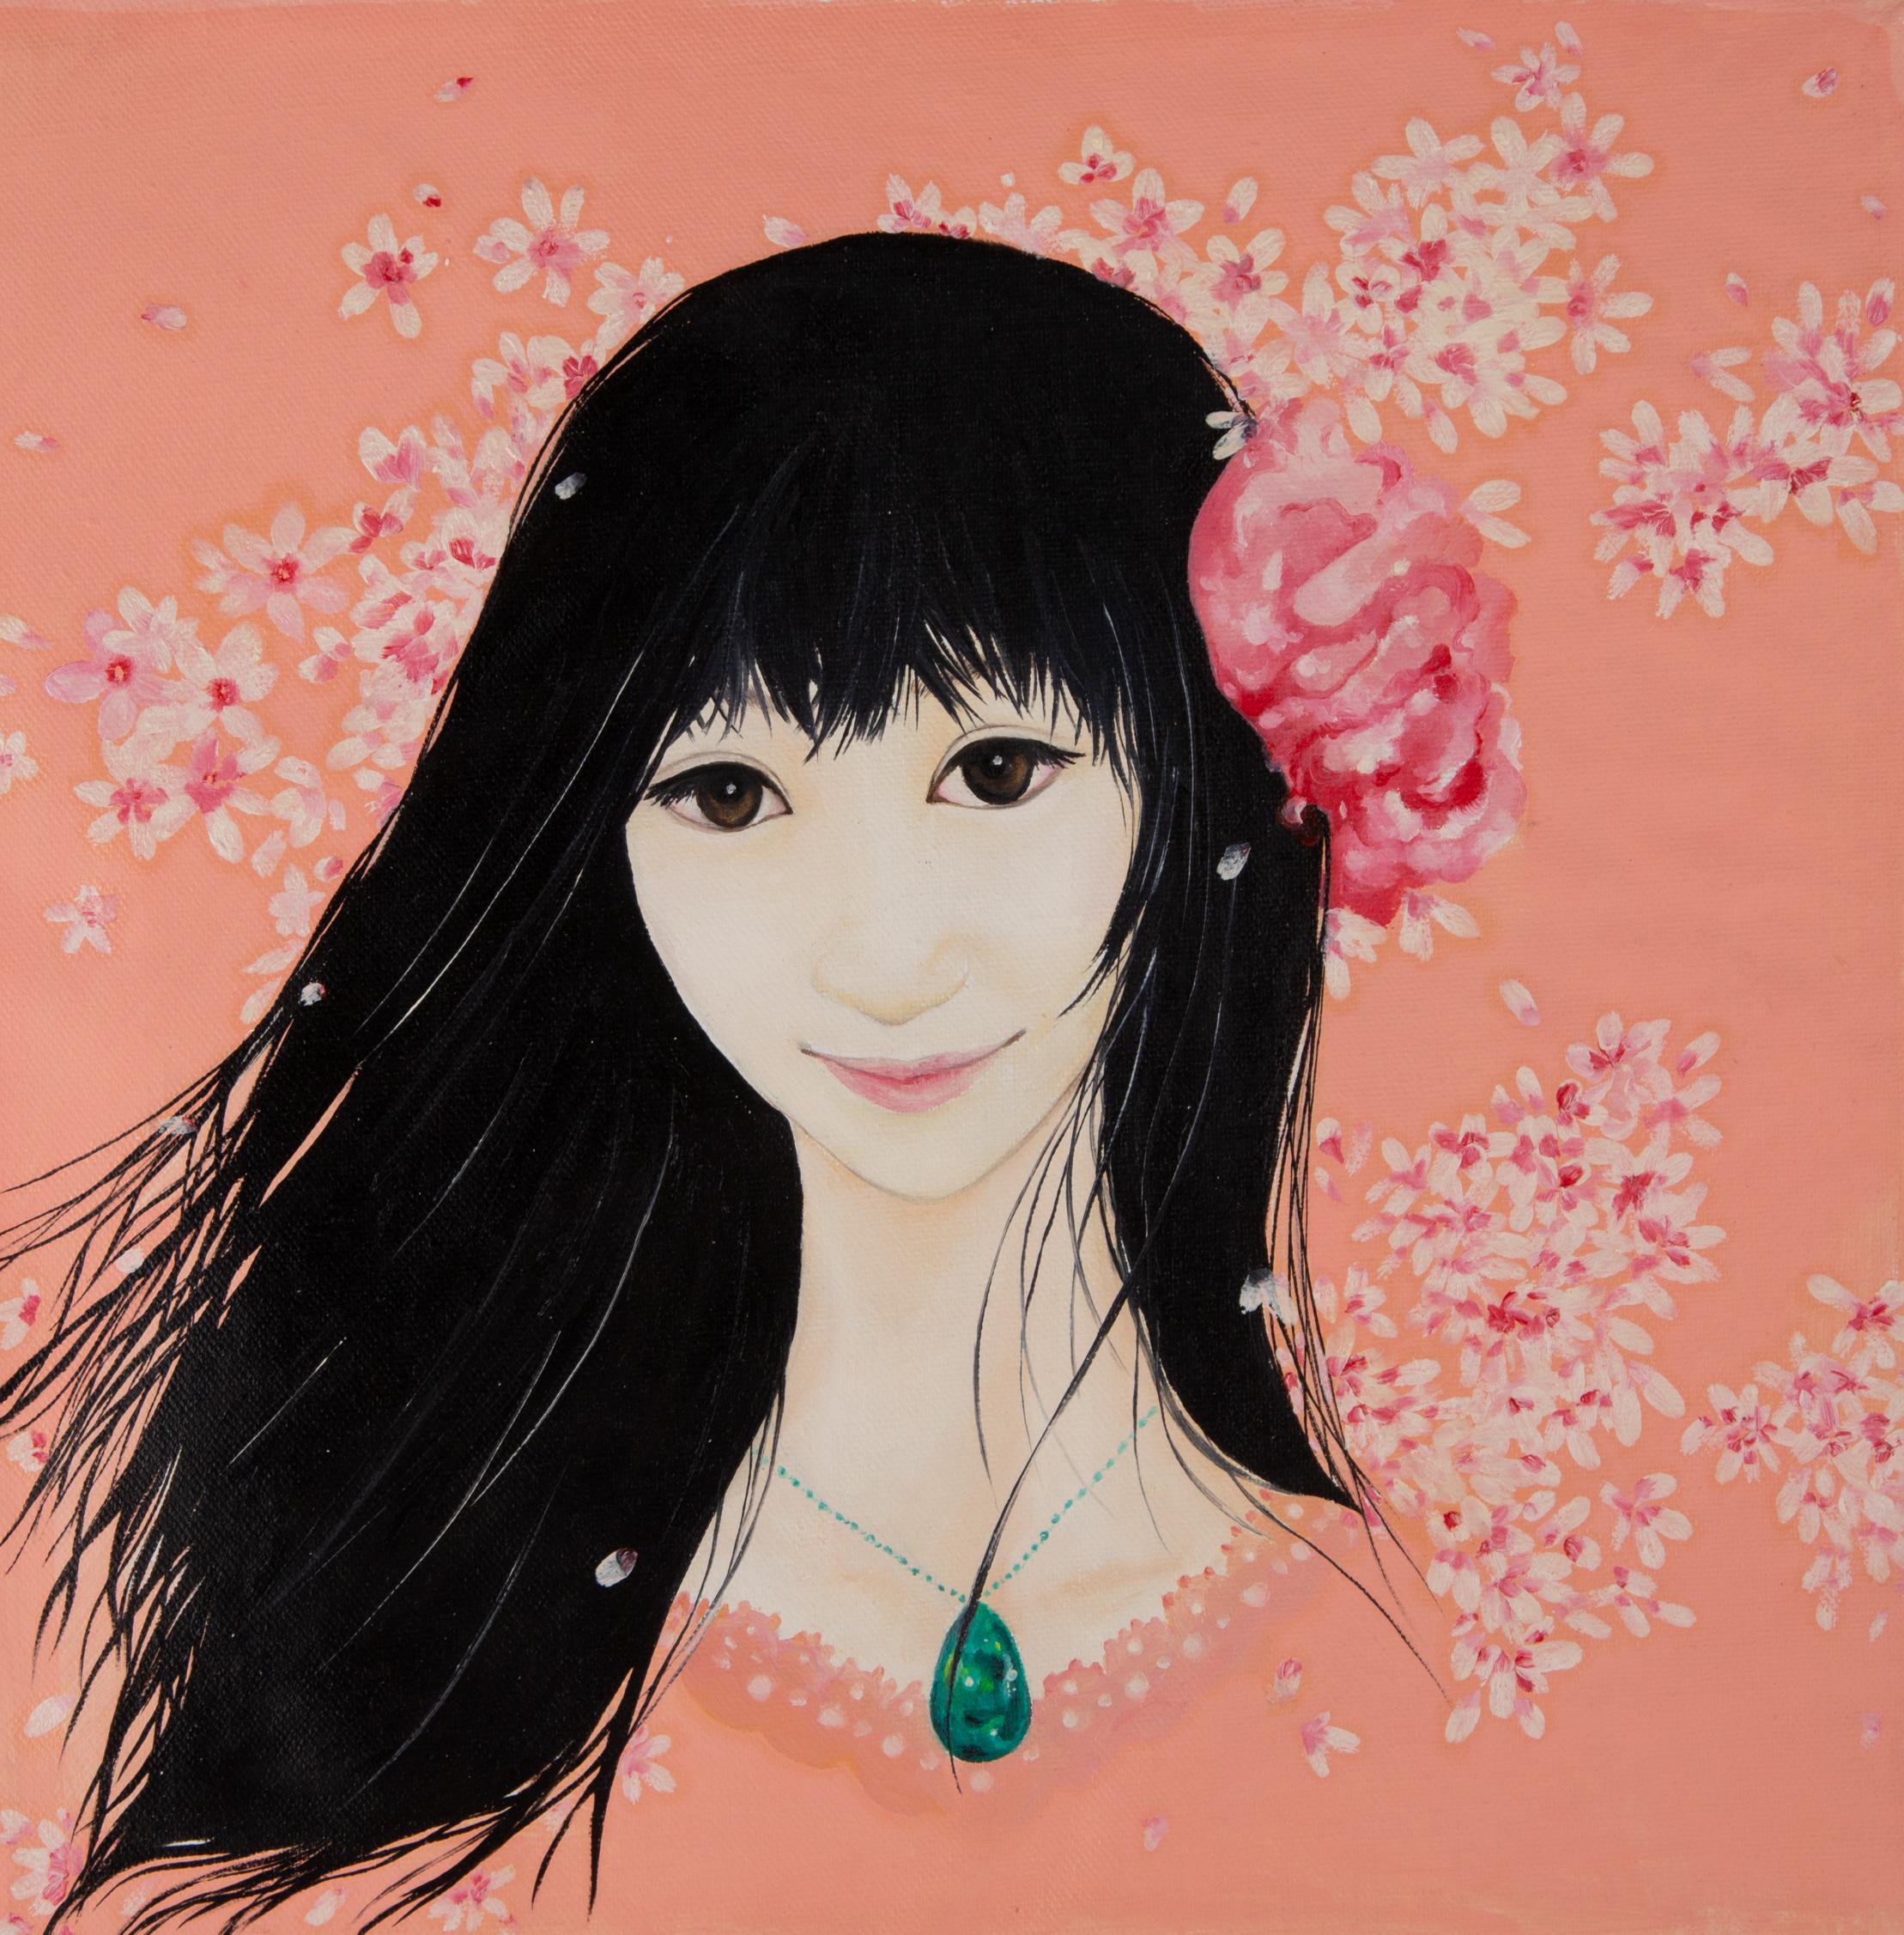 Title: Woman Under Sakura
Medium: Oil on canvas
Size: 12 x 12 inches
Frame: Framing options available!
Condition: The painting appears to be in excellent condition.
Note: This painting is unstretched
Year: 2000 Circa
Artist: Zhao Wang
Signature: